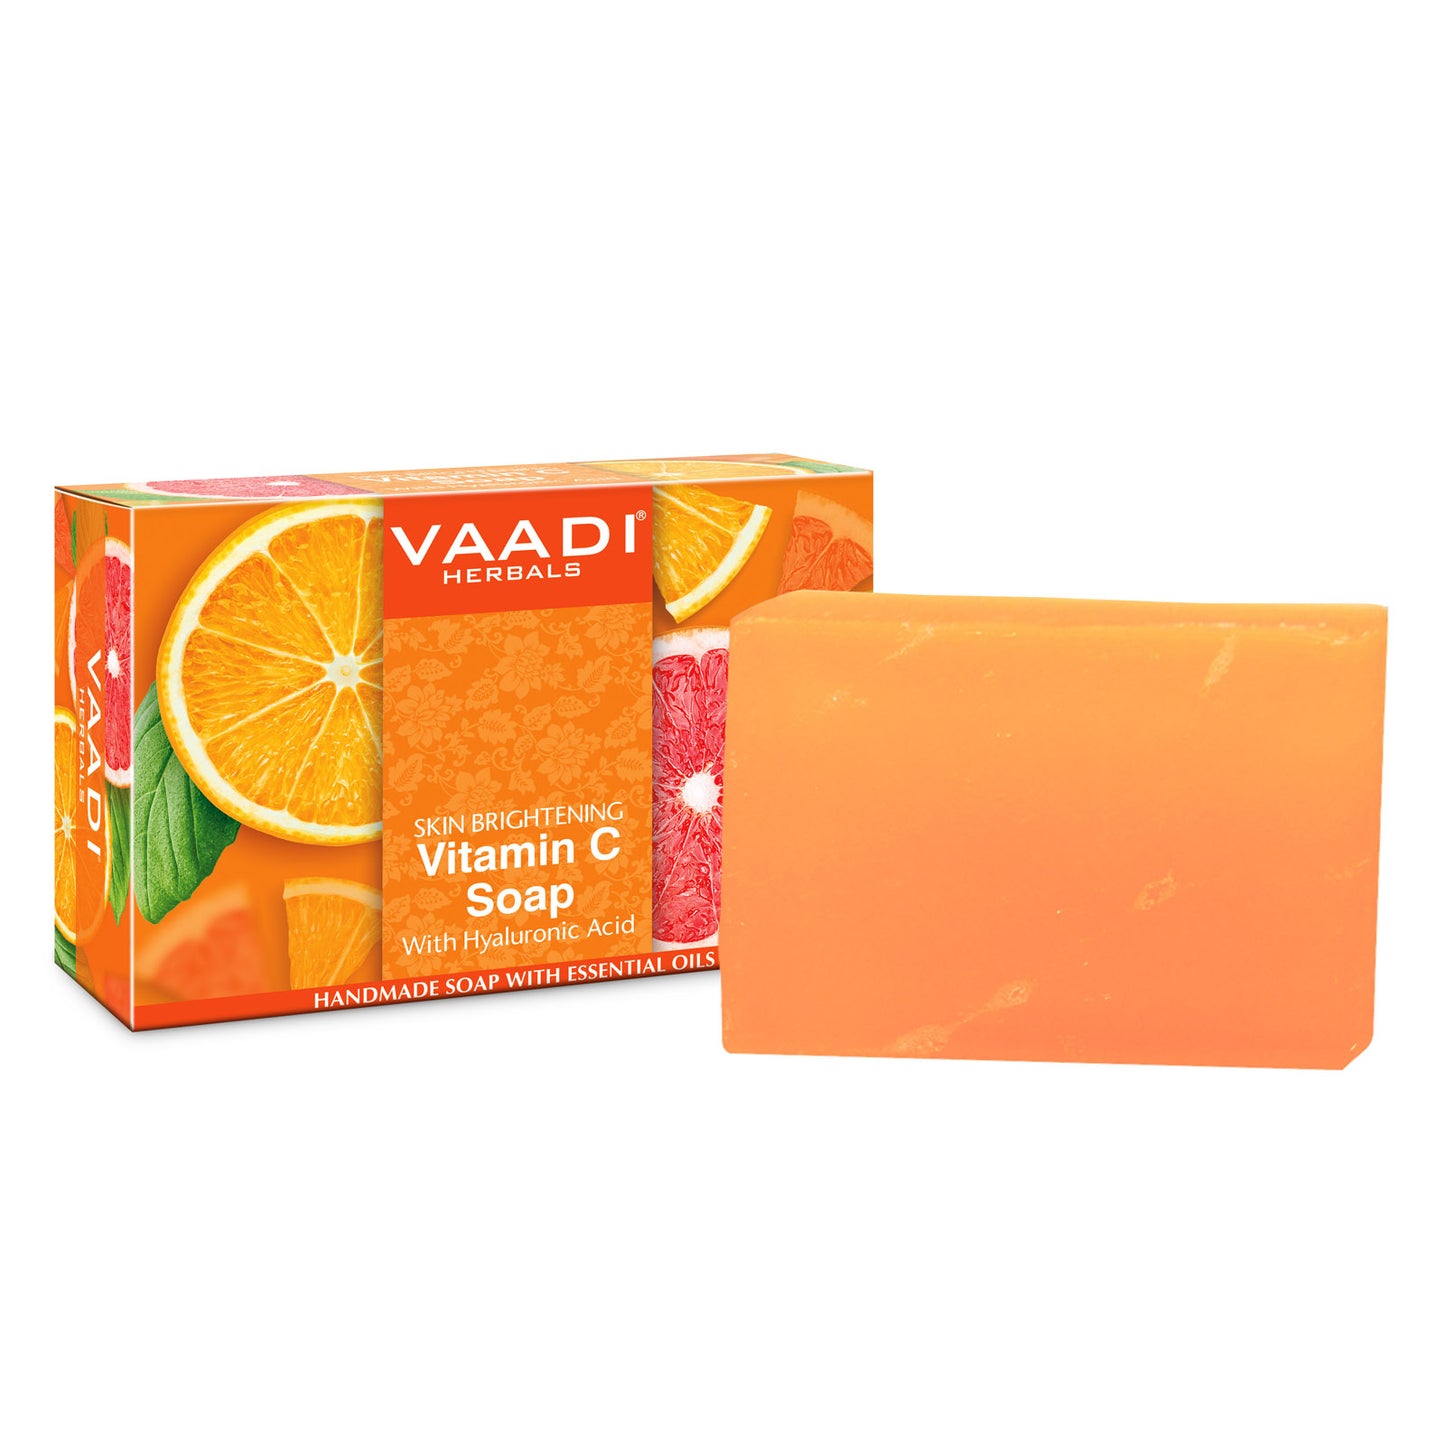 Vitamin C Soap with Hyaluronic Acid (75 gms)